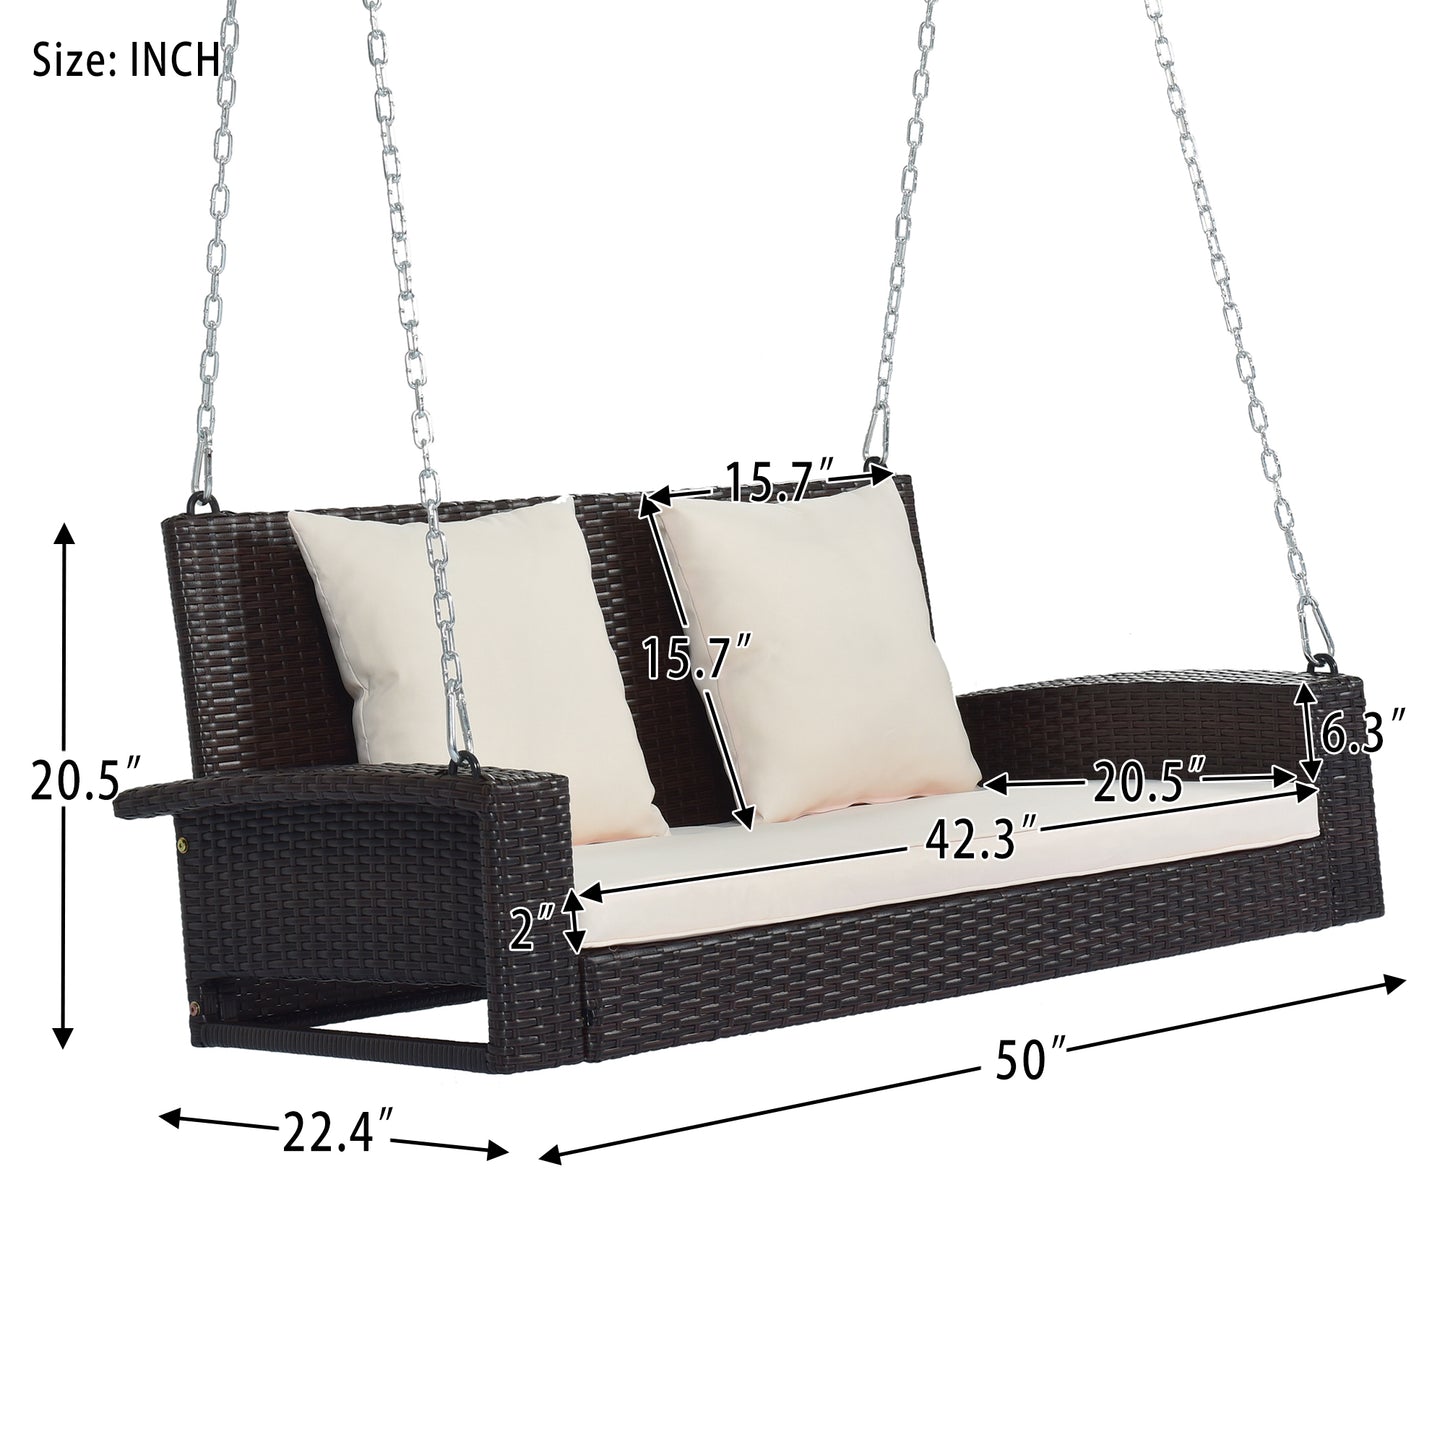 2-Person Wicker Outdoor Porch Swing, Hanging Patio Bench Loveseat Sofa with Weather Resistant Chains, Cushion, Pillow, Rattan Swing Bench for Garden, Backyard, Pond, Brown